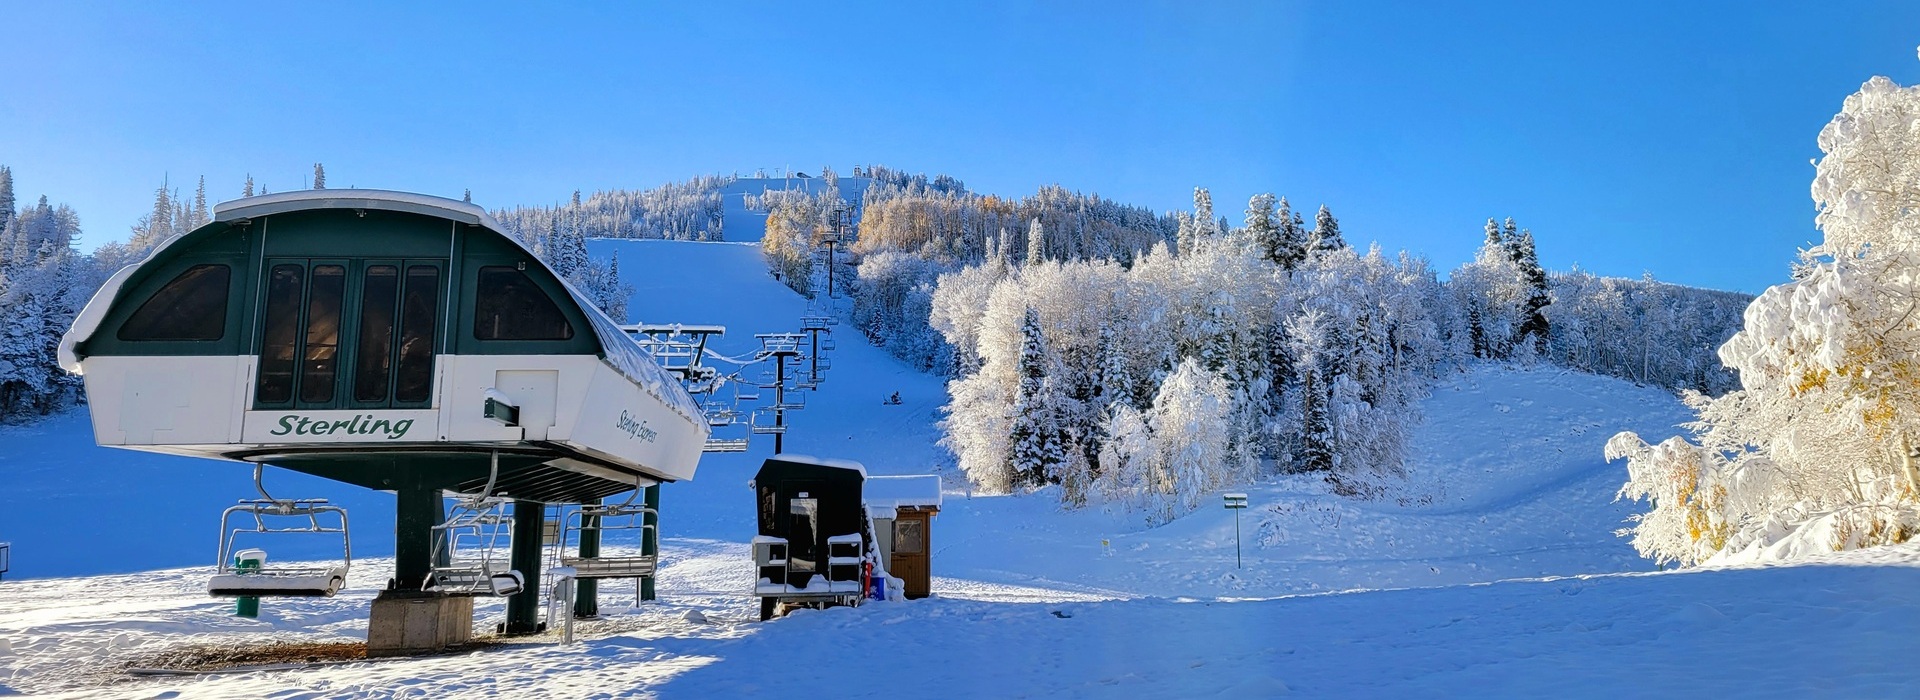 Sterling Lift In Winter At Deer Valley